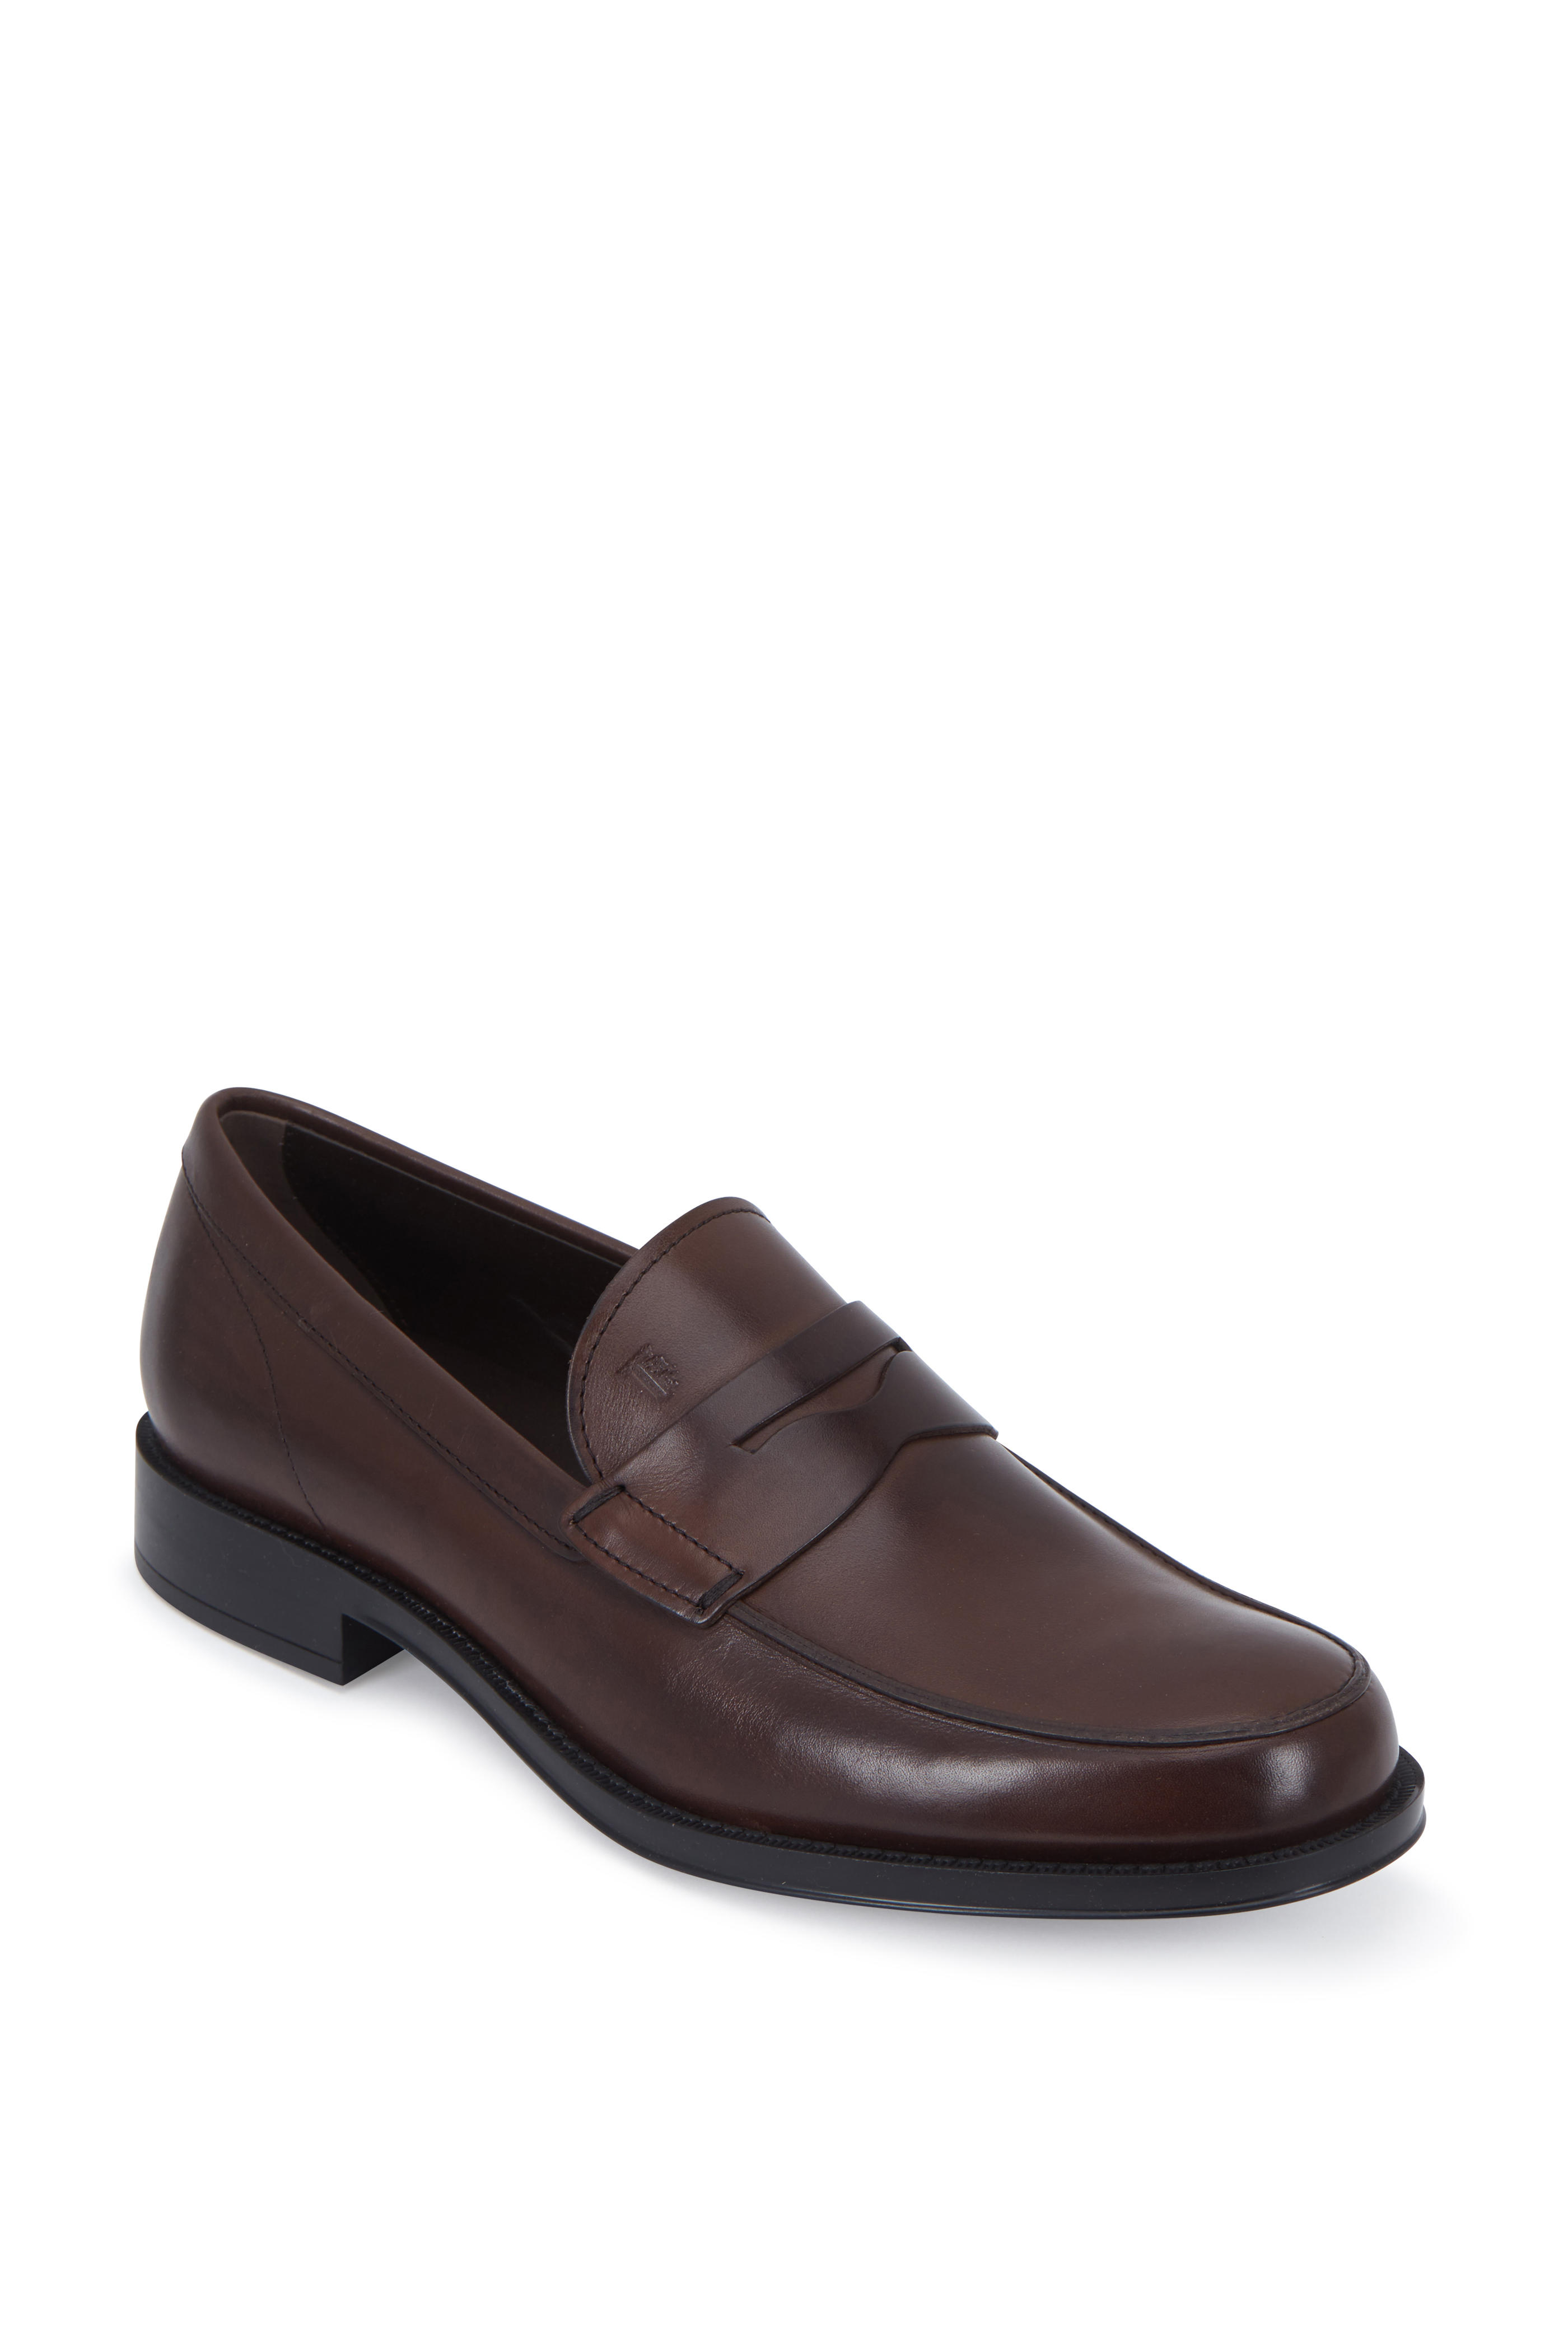 tod's classic loafers